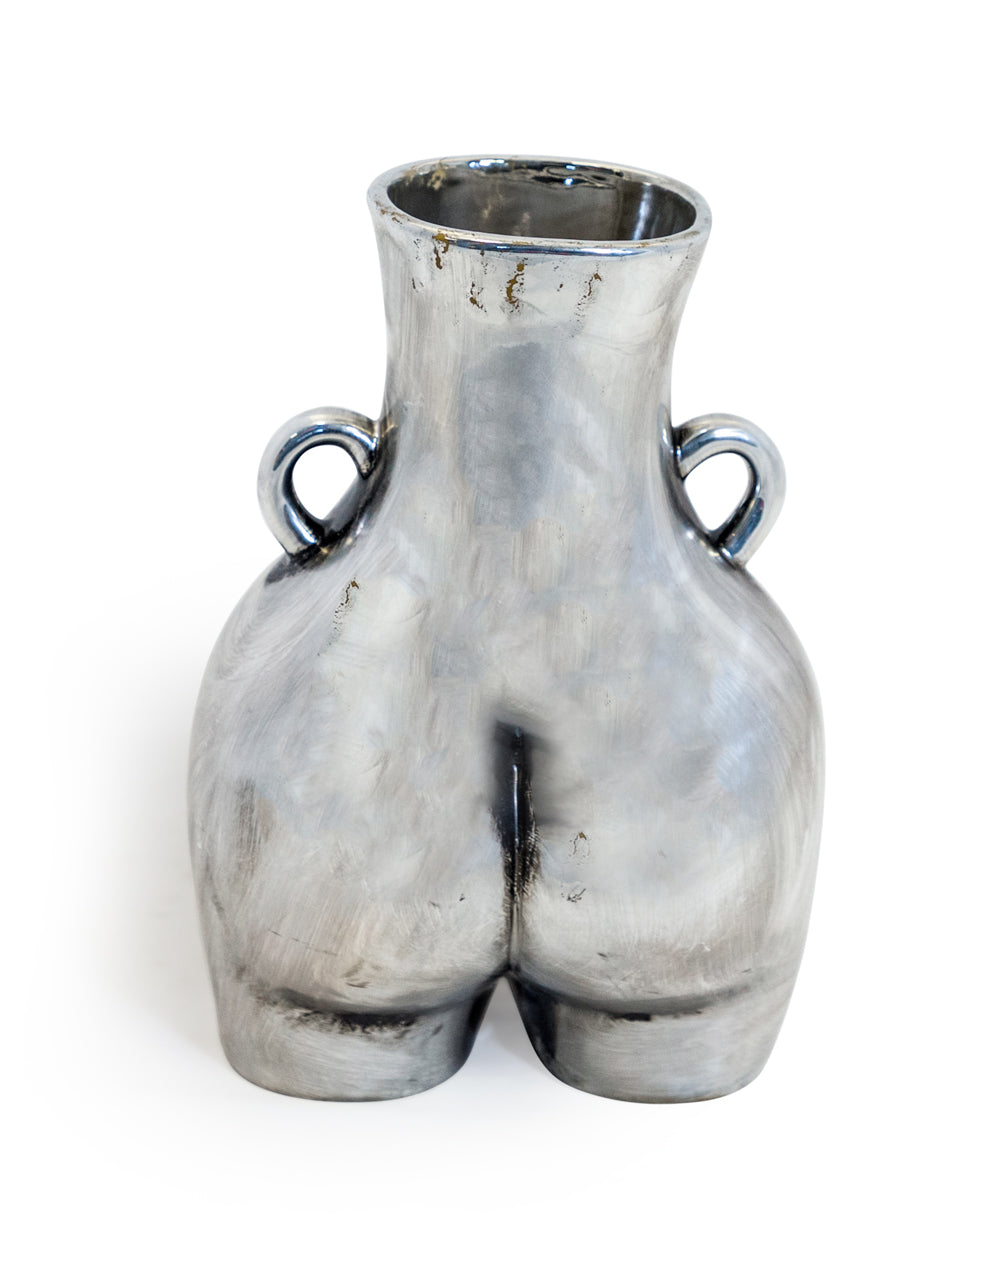 Antique Silver Large "Love Handles" Booty Vase